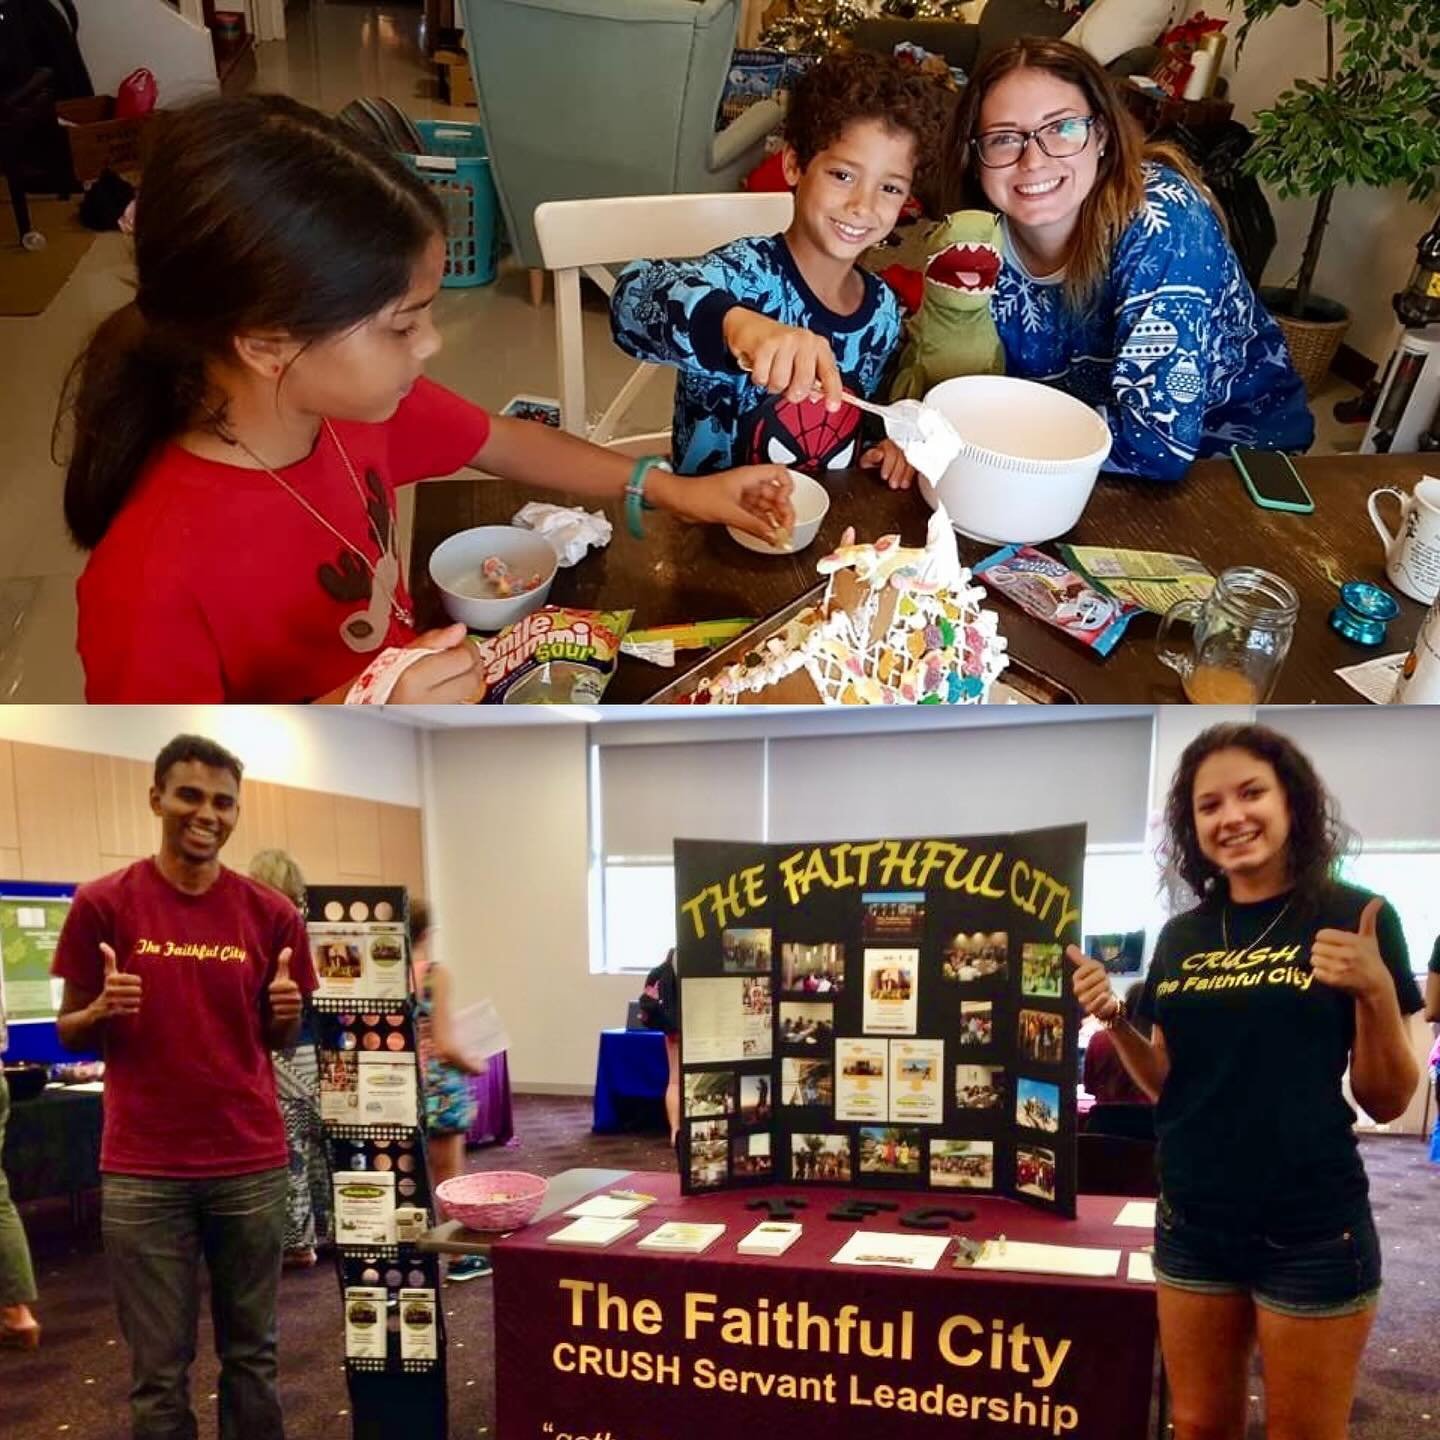 Weave &amp; Cleave Podcast (The Faithful City)
Weaving Voices of Resilience and Belonging
Michelle Stiffler and Sanghoon Yoo

Season 3 Episode 9

Taking the Steps Available: An Interview with Brooke Weimer
Spreaker
https://www.spreaker.com/episode/ta